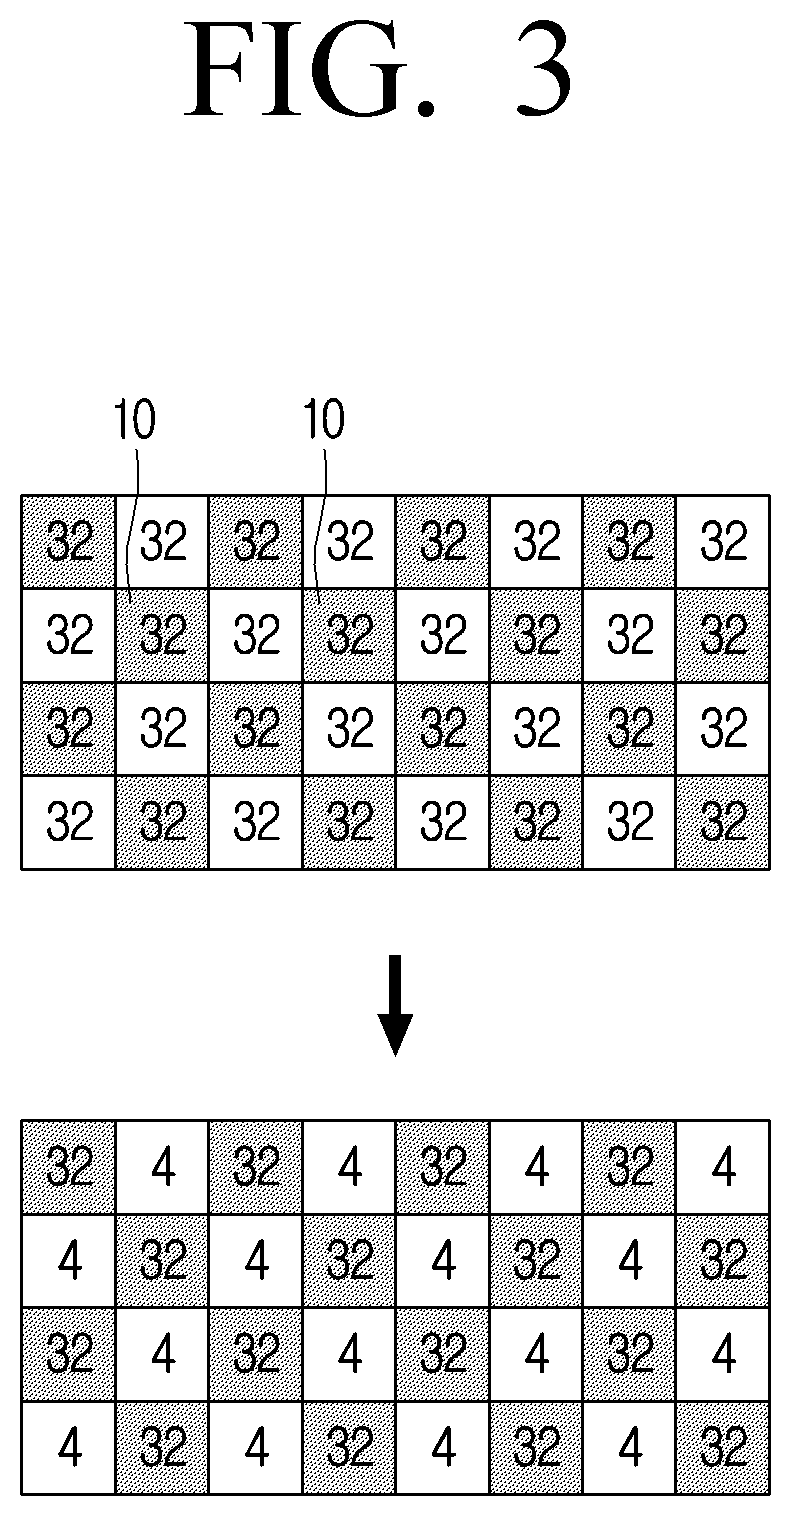 Storing index information for pixel combinations with similarity to a pixel to replace the pixel information